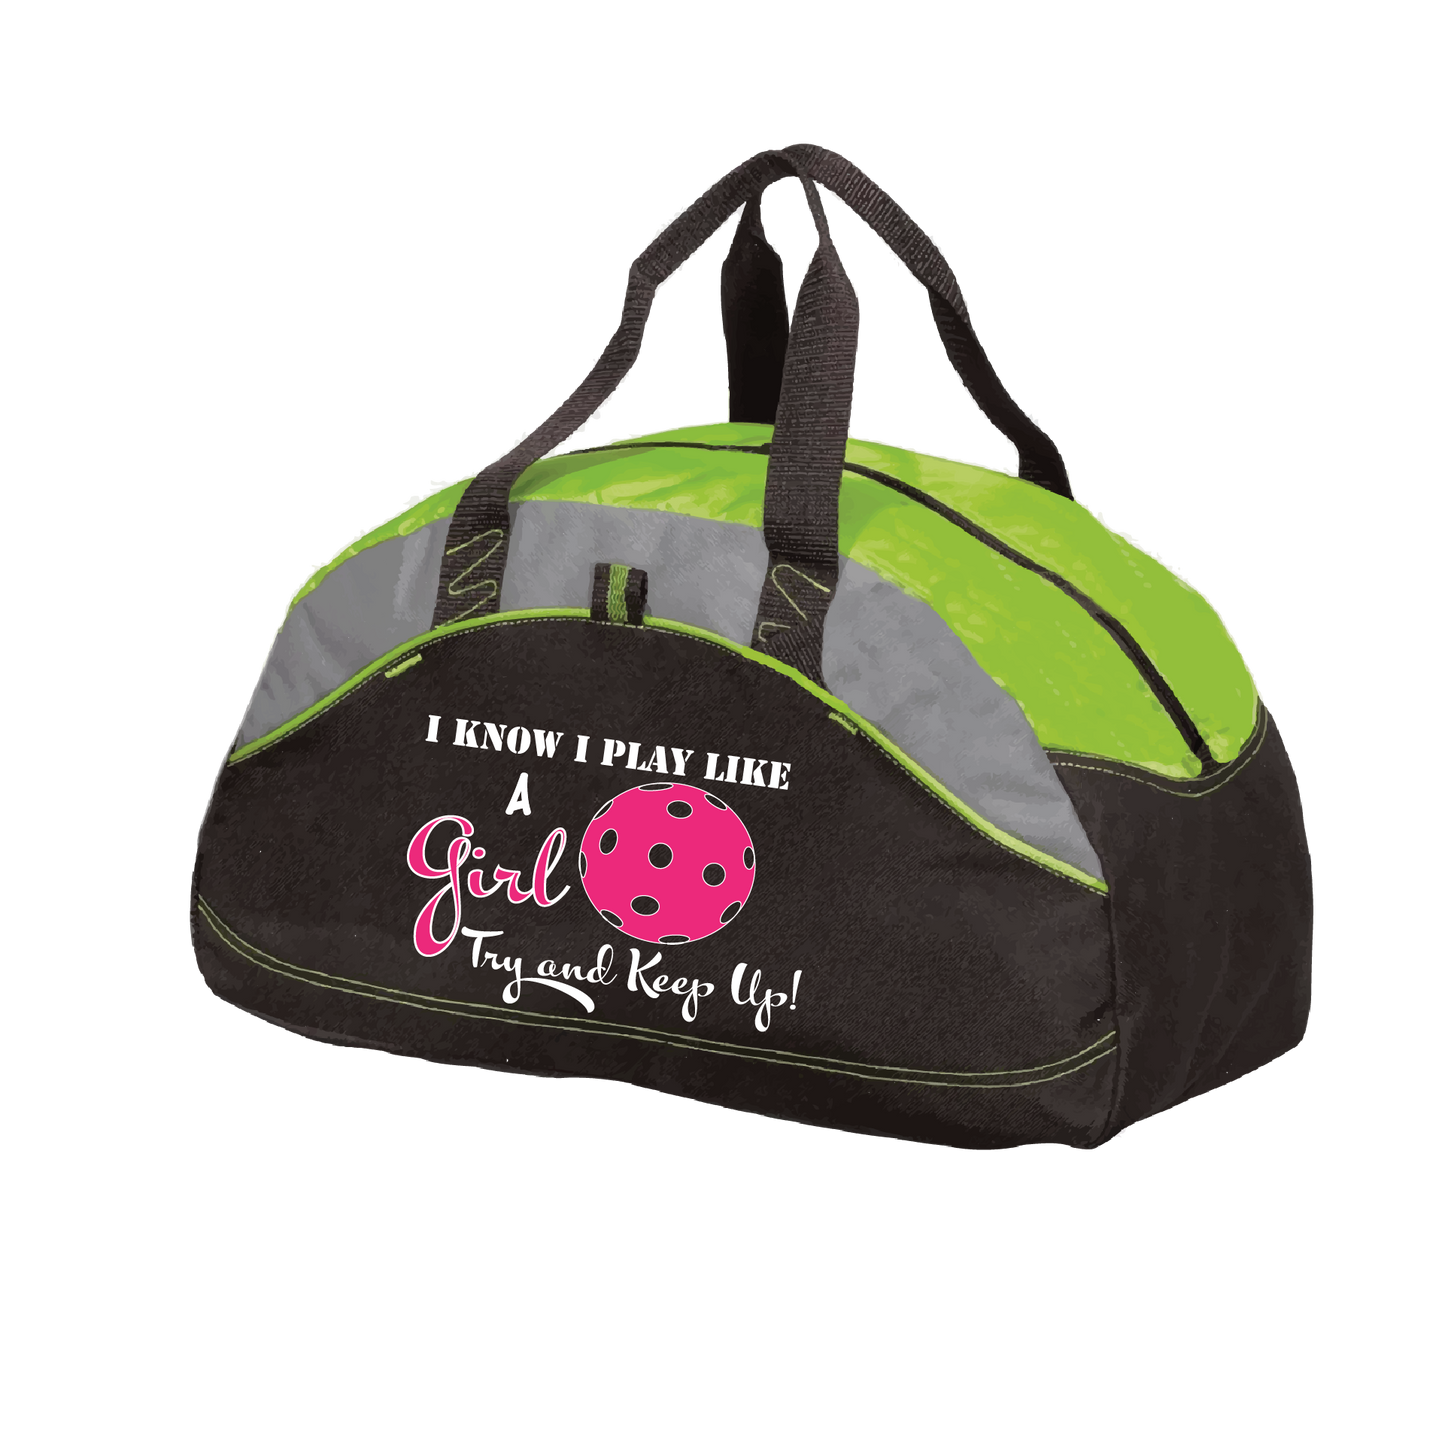 Pickleball Bag Design: I know I Play Like a Girl, Try to Keep Up  Carry your gear in comfort and style. This fun pickleball duffel bag is the perfect accessory for all pickleball players needing to keep their gear in one place. This medium sized duffel tote is ideal for all your pickleball activities. The large center compartment allows for plenty of space and the mesh end pocket is perfect for holding a water bottle. 